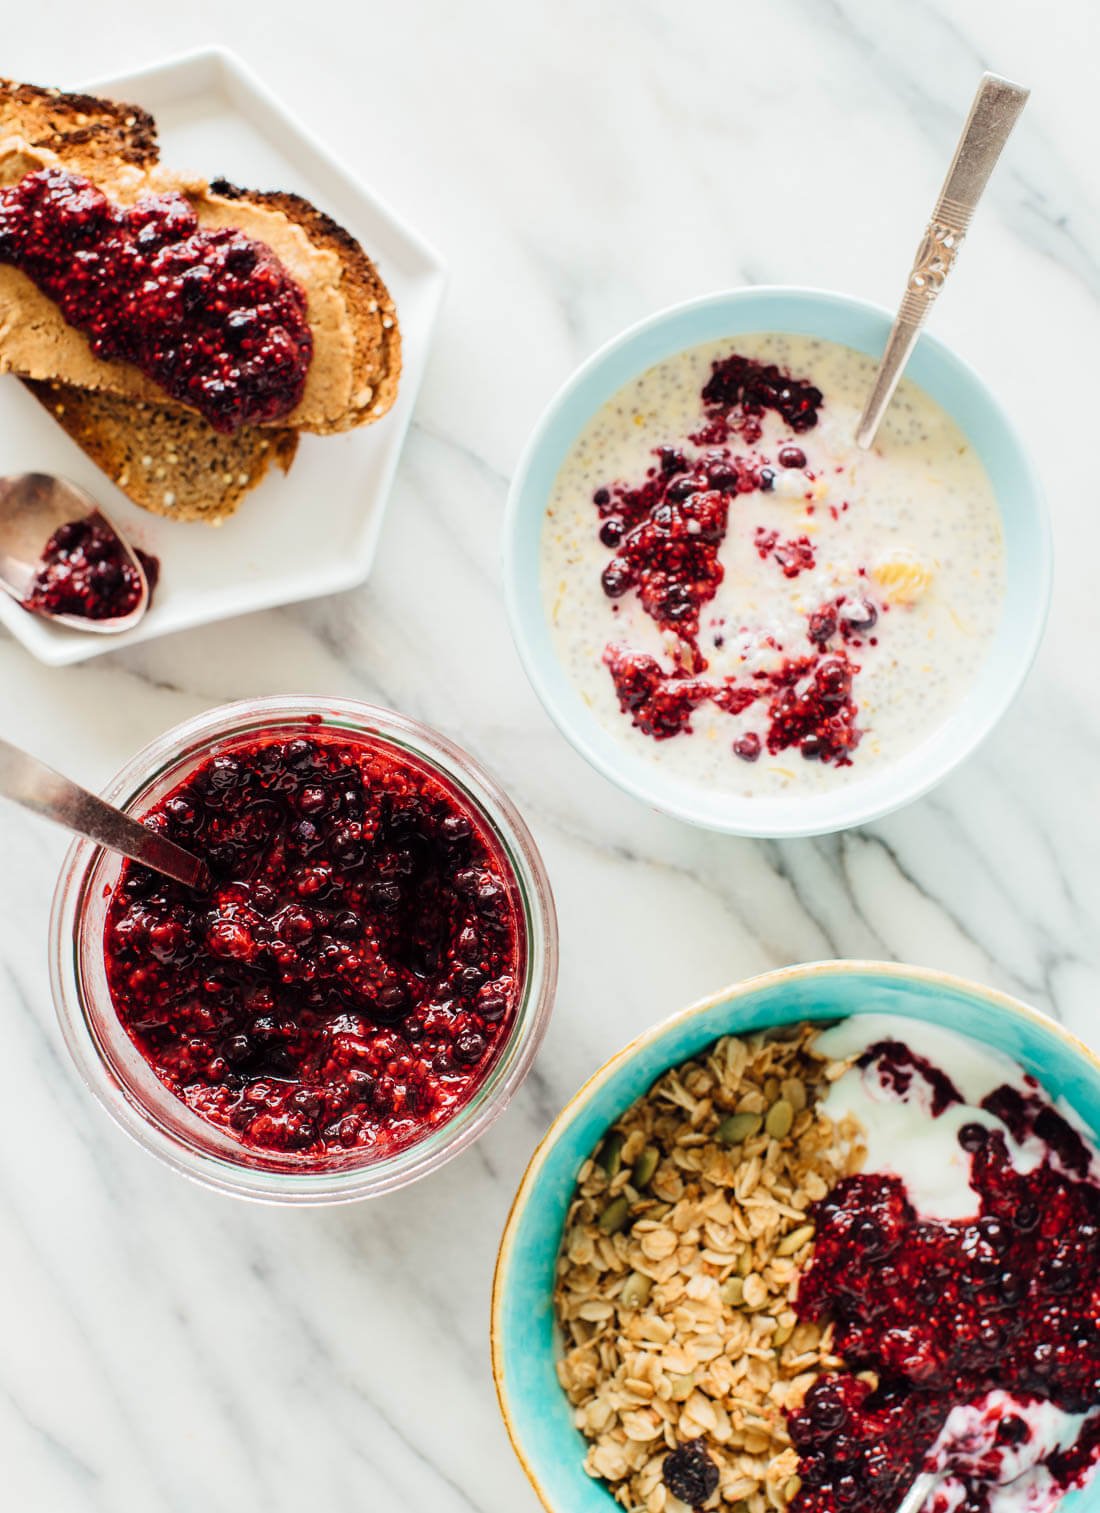 So many delicious uses for this easy berry chia jam recipe! It's a great way to eat more nutrient-rich berries.